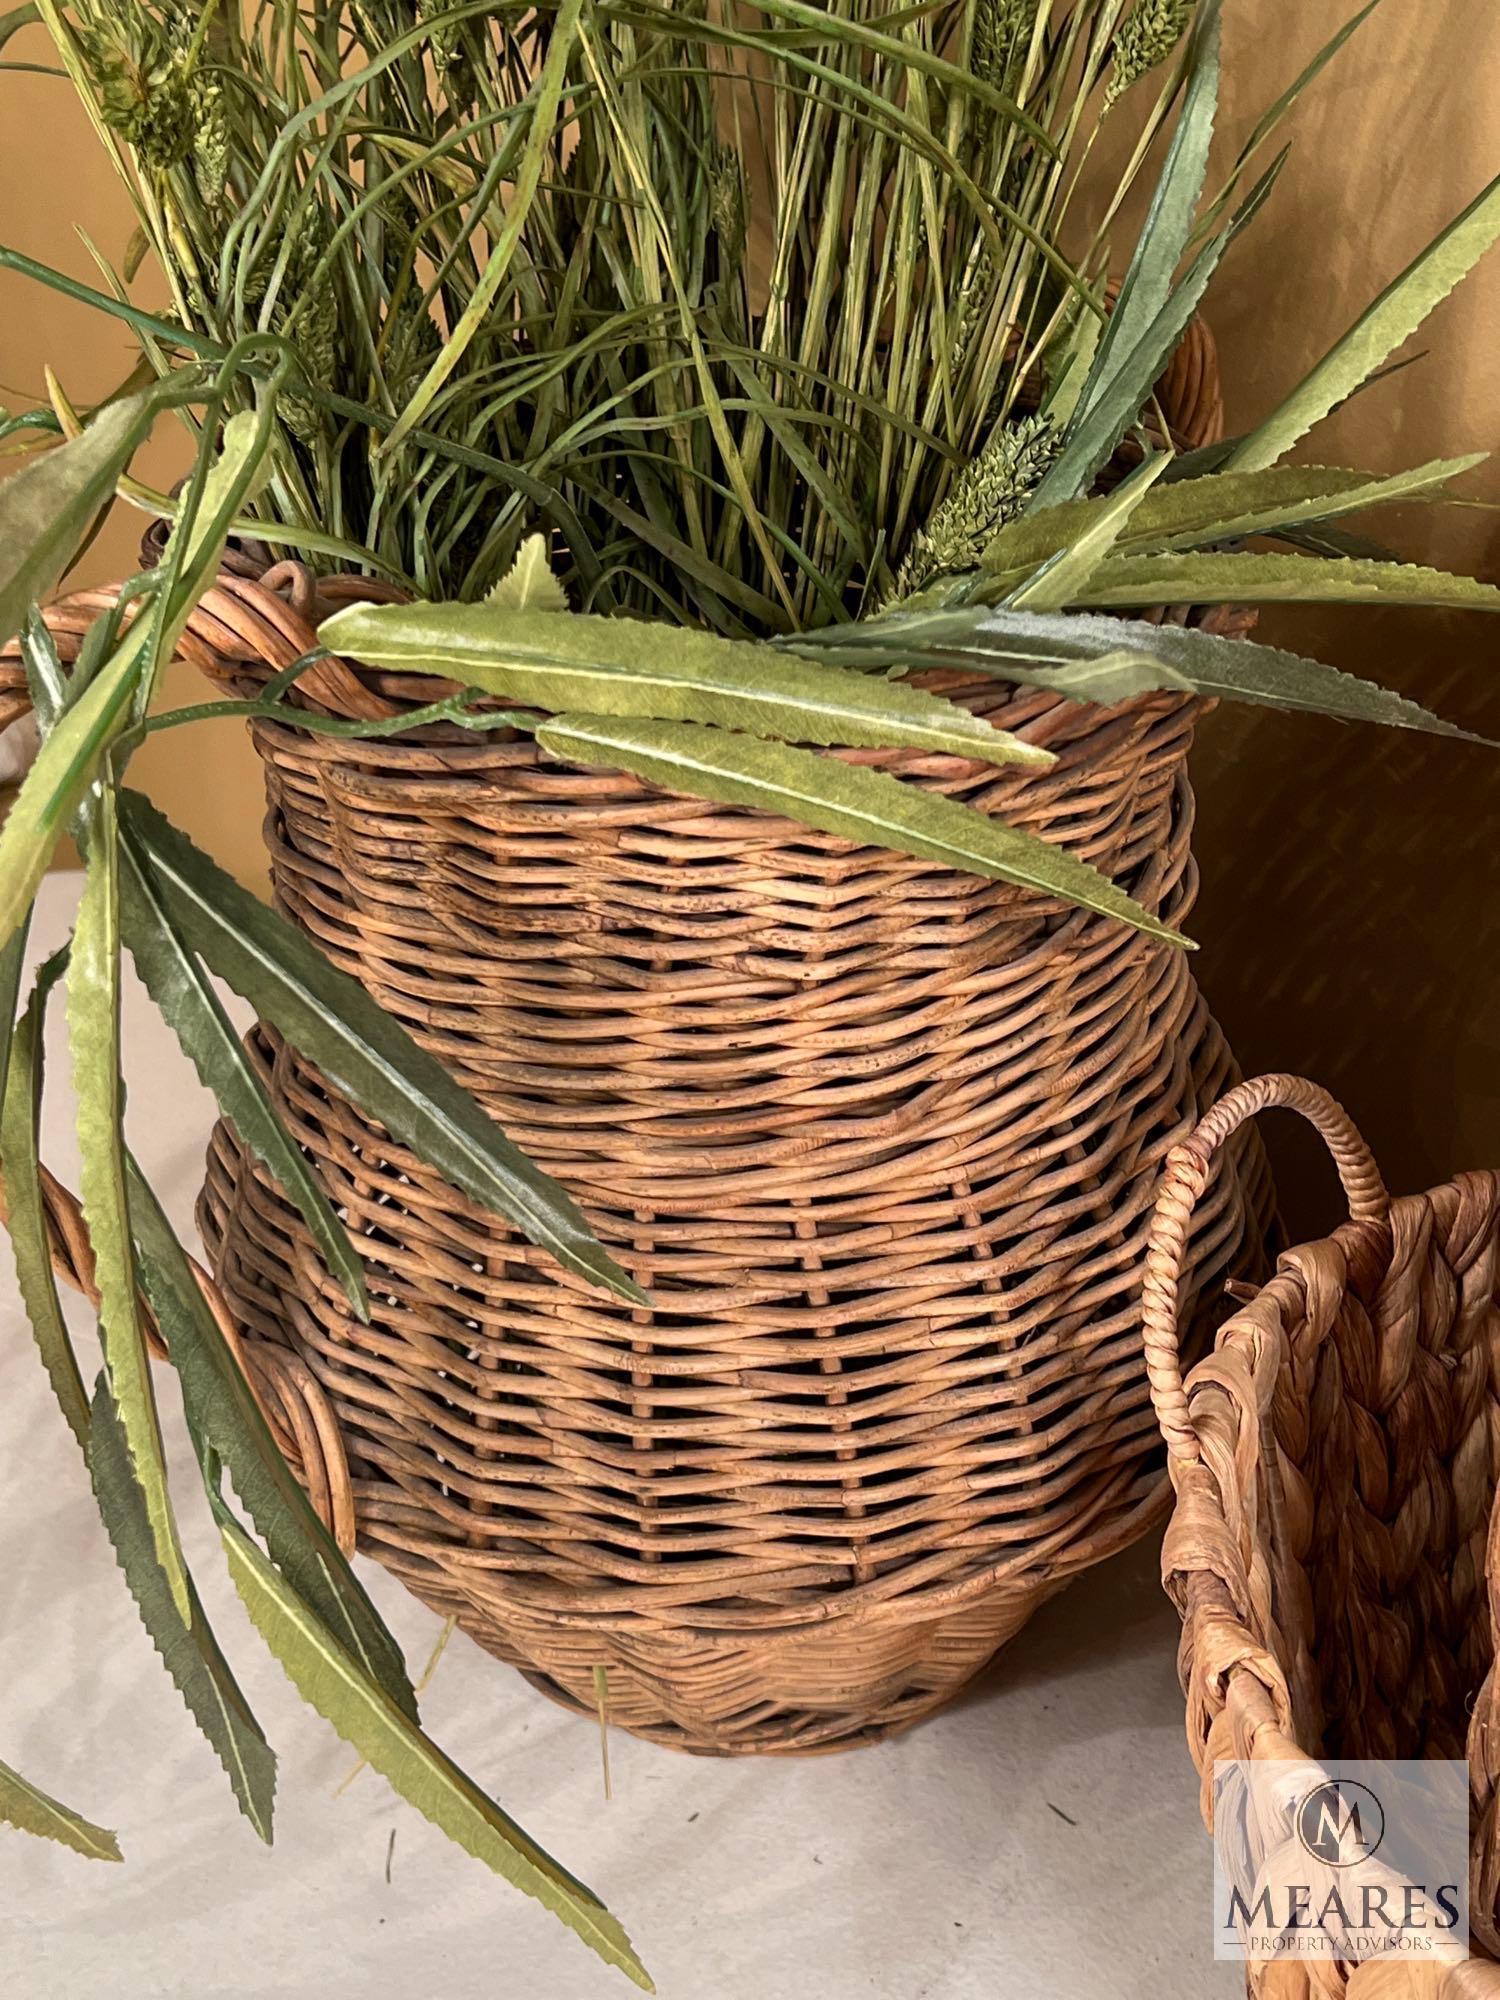 Mixed Lot of Greenery and Baskets